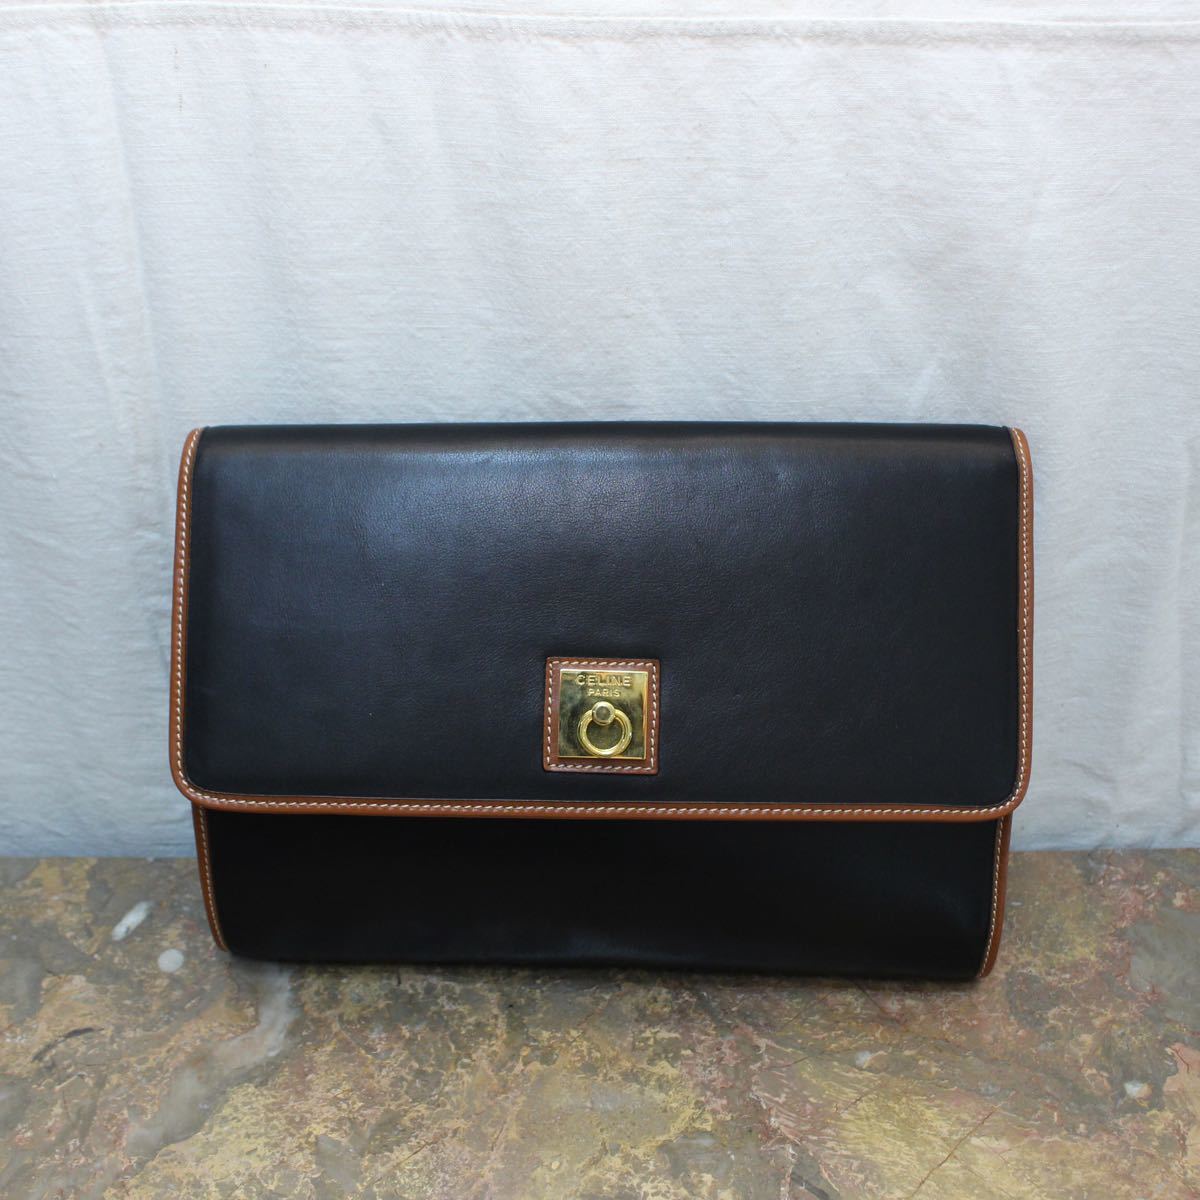 OLD CELINE METAL LOGO LEATHER CLUTCH BAG MADE IN ITALY/オールドセリーヌメタルロゴ レザークラッチバッグ - primerodontocenter.com.br